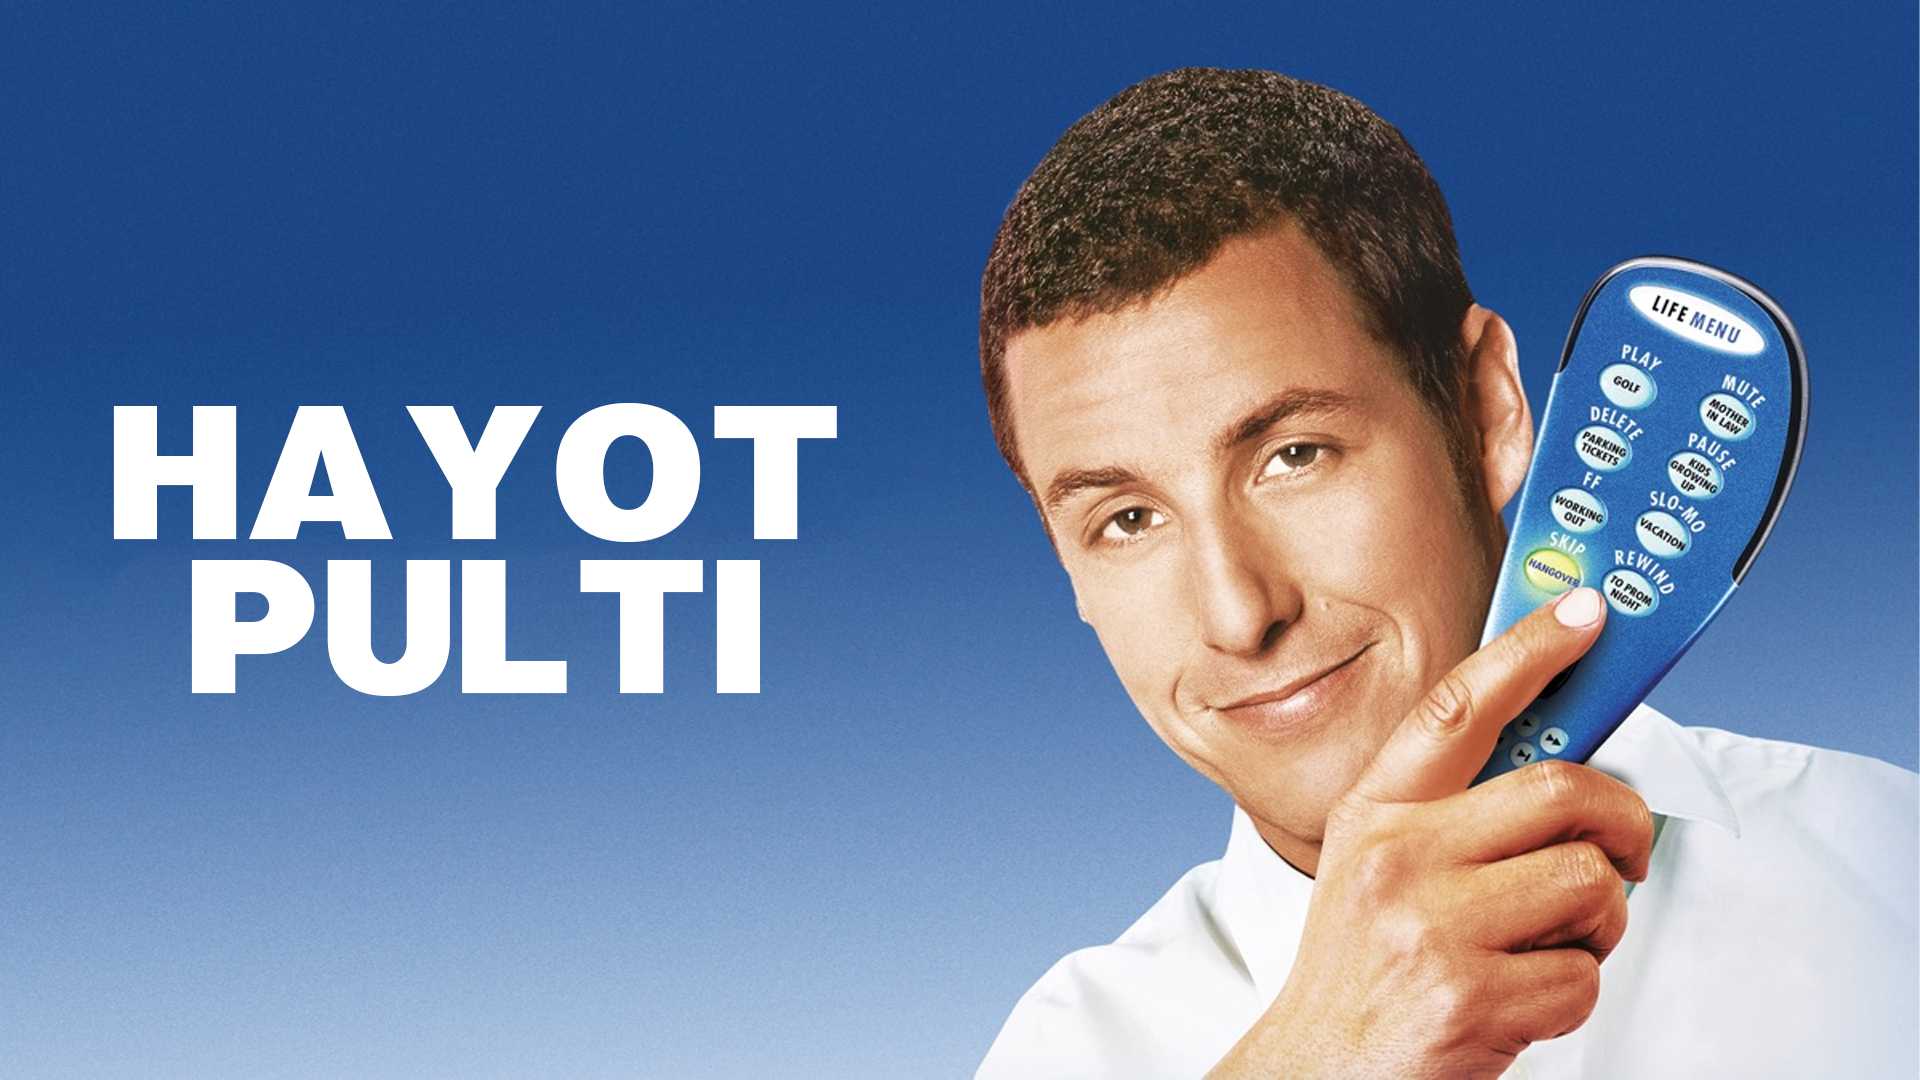 Hayot pulti